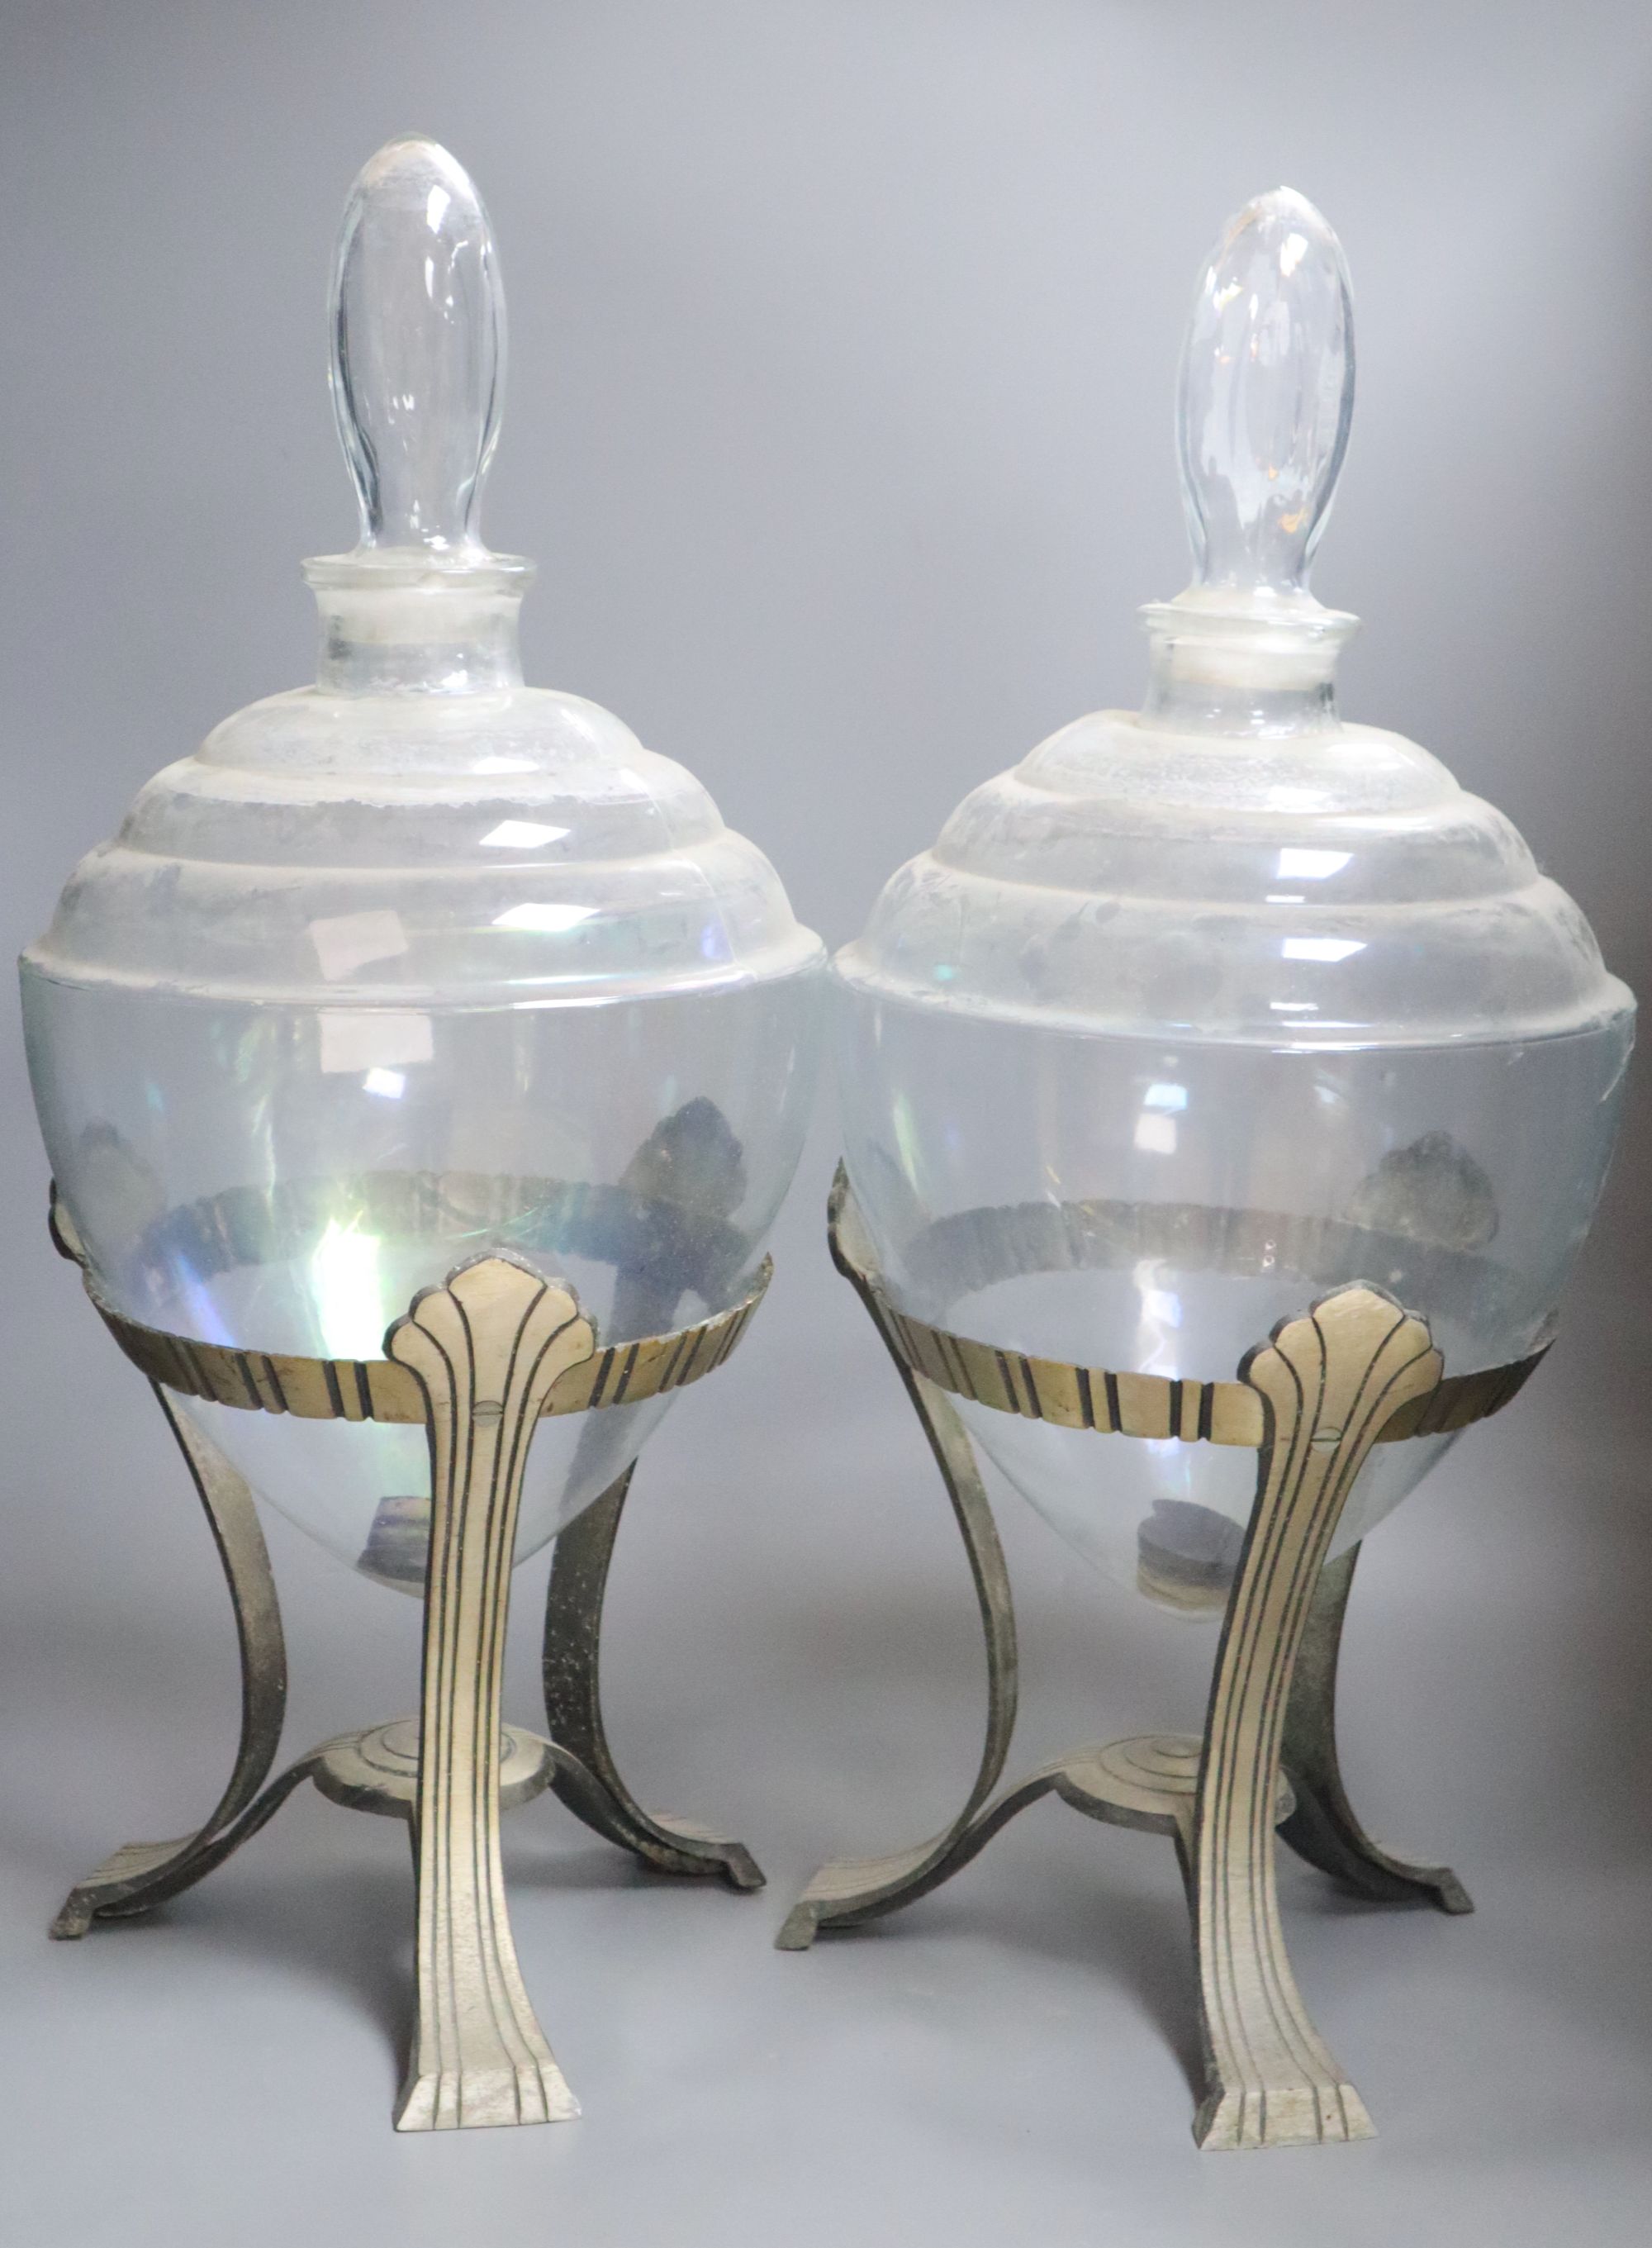 A pair of glass jars with covers on aluminium stands